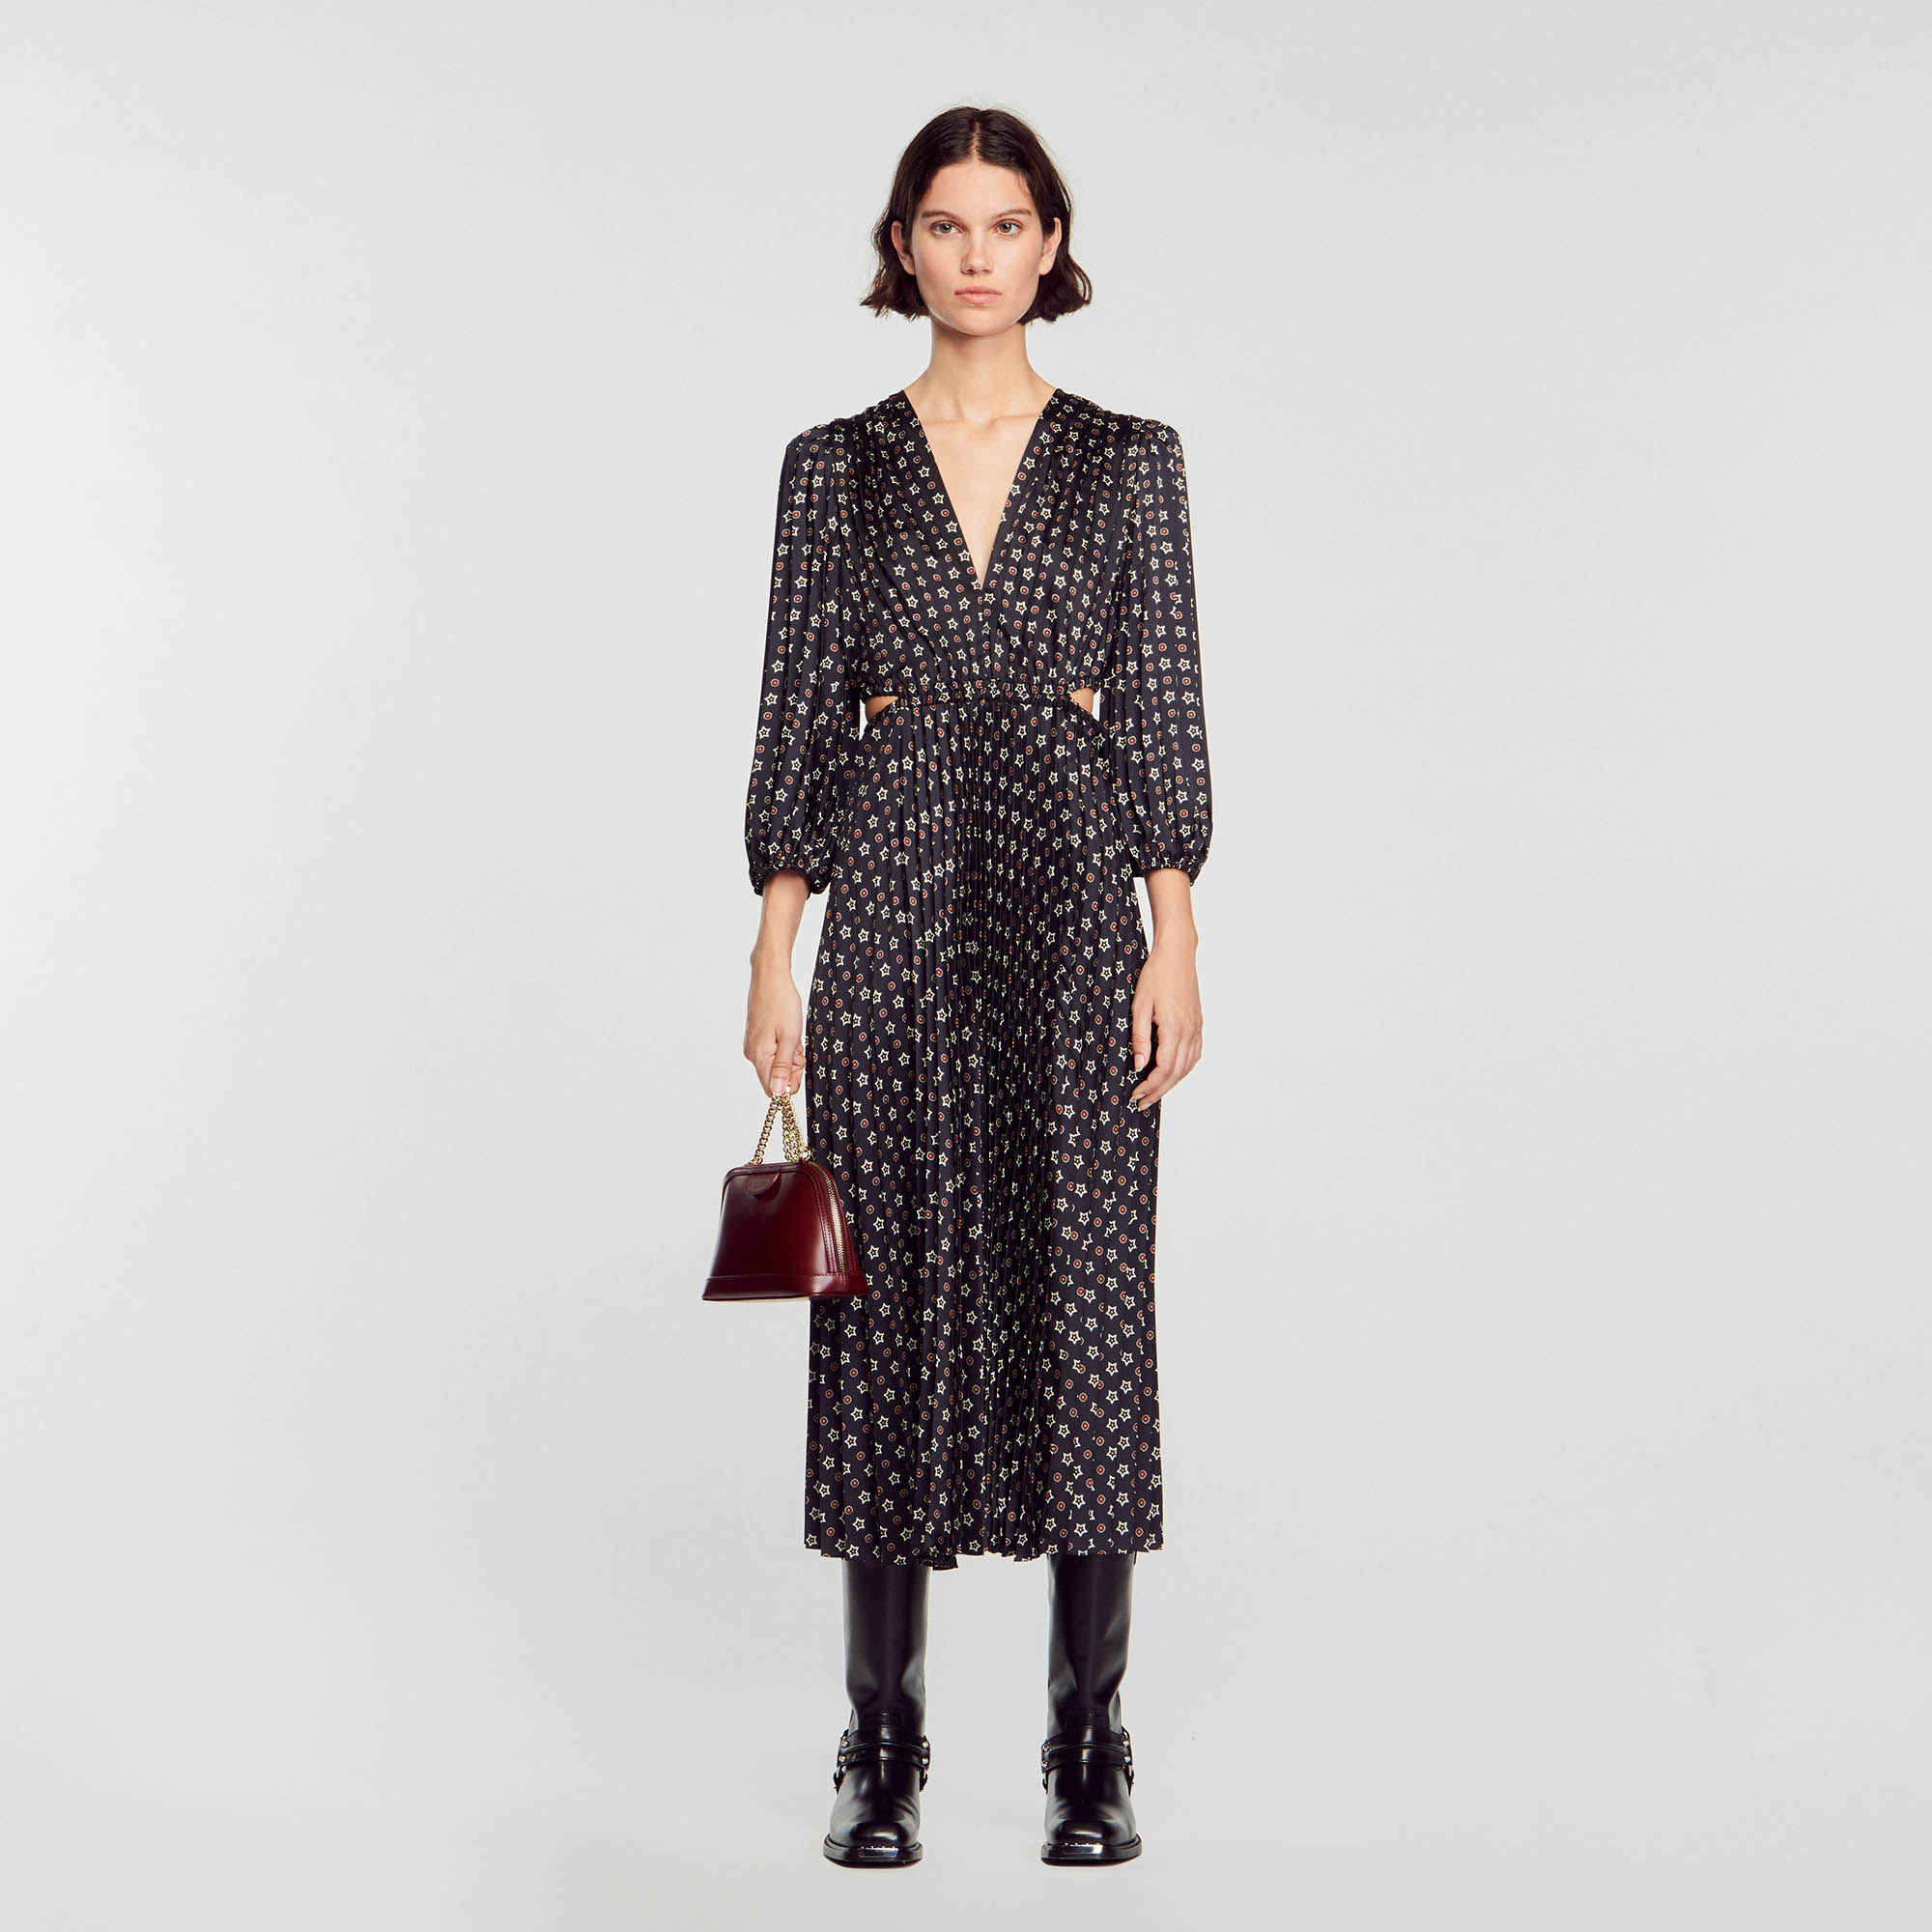 Sandro polyester Long pleated dress with a mini stars print, long voluminous sleeves with gathered cuffs, an elasticated waist with cut-outs at the sides, and a flared skirt